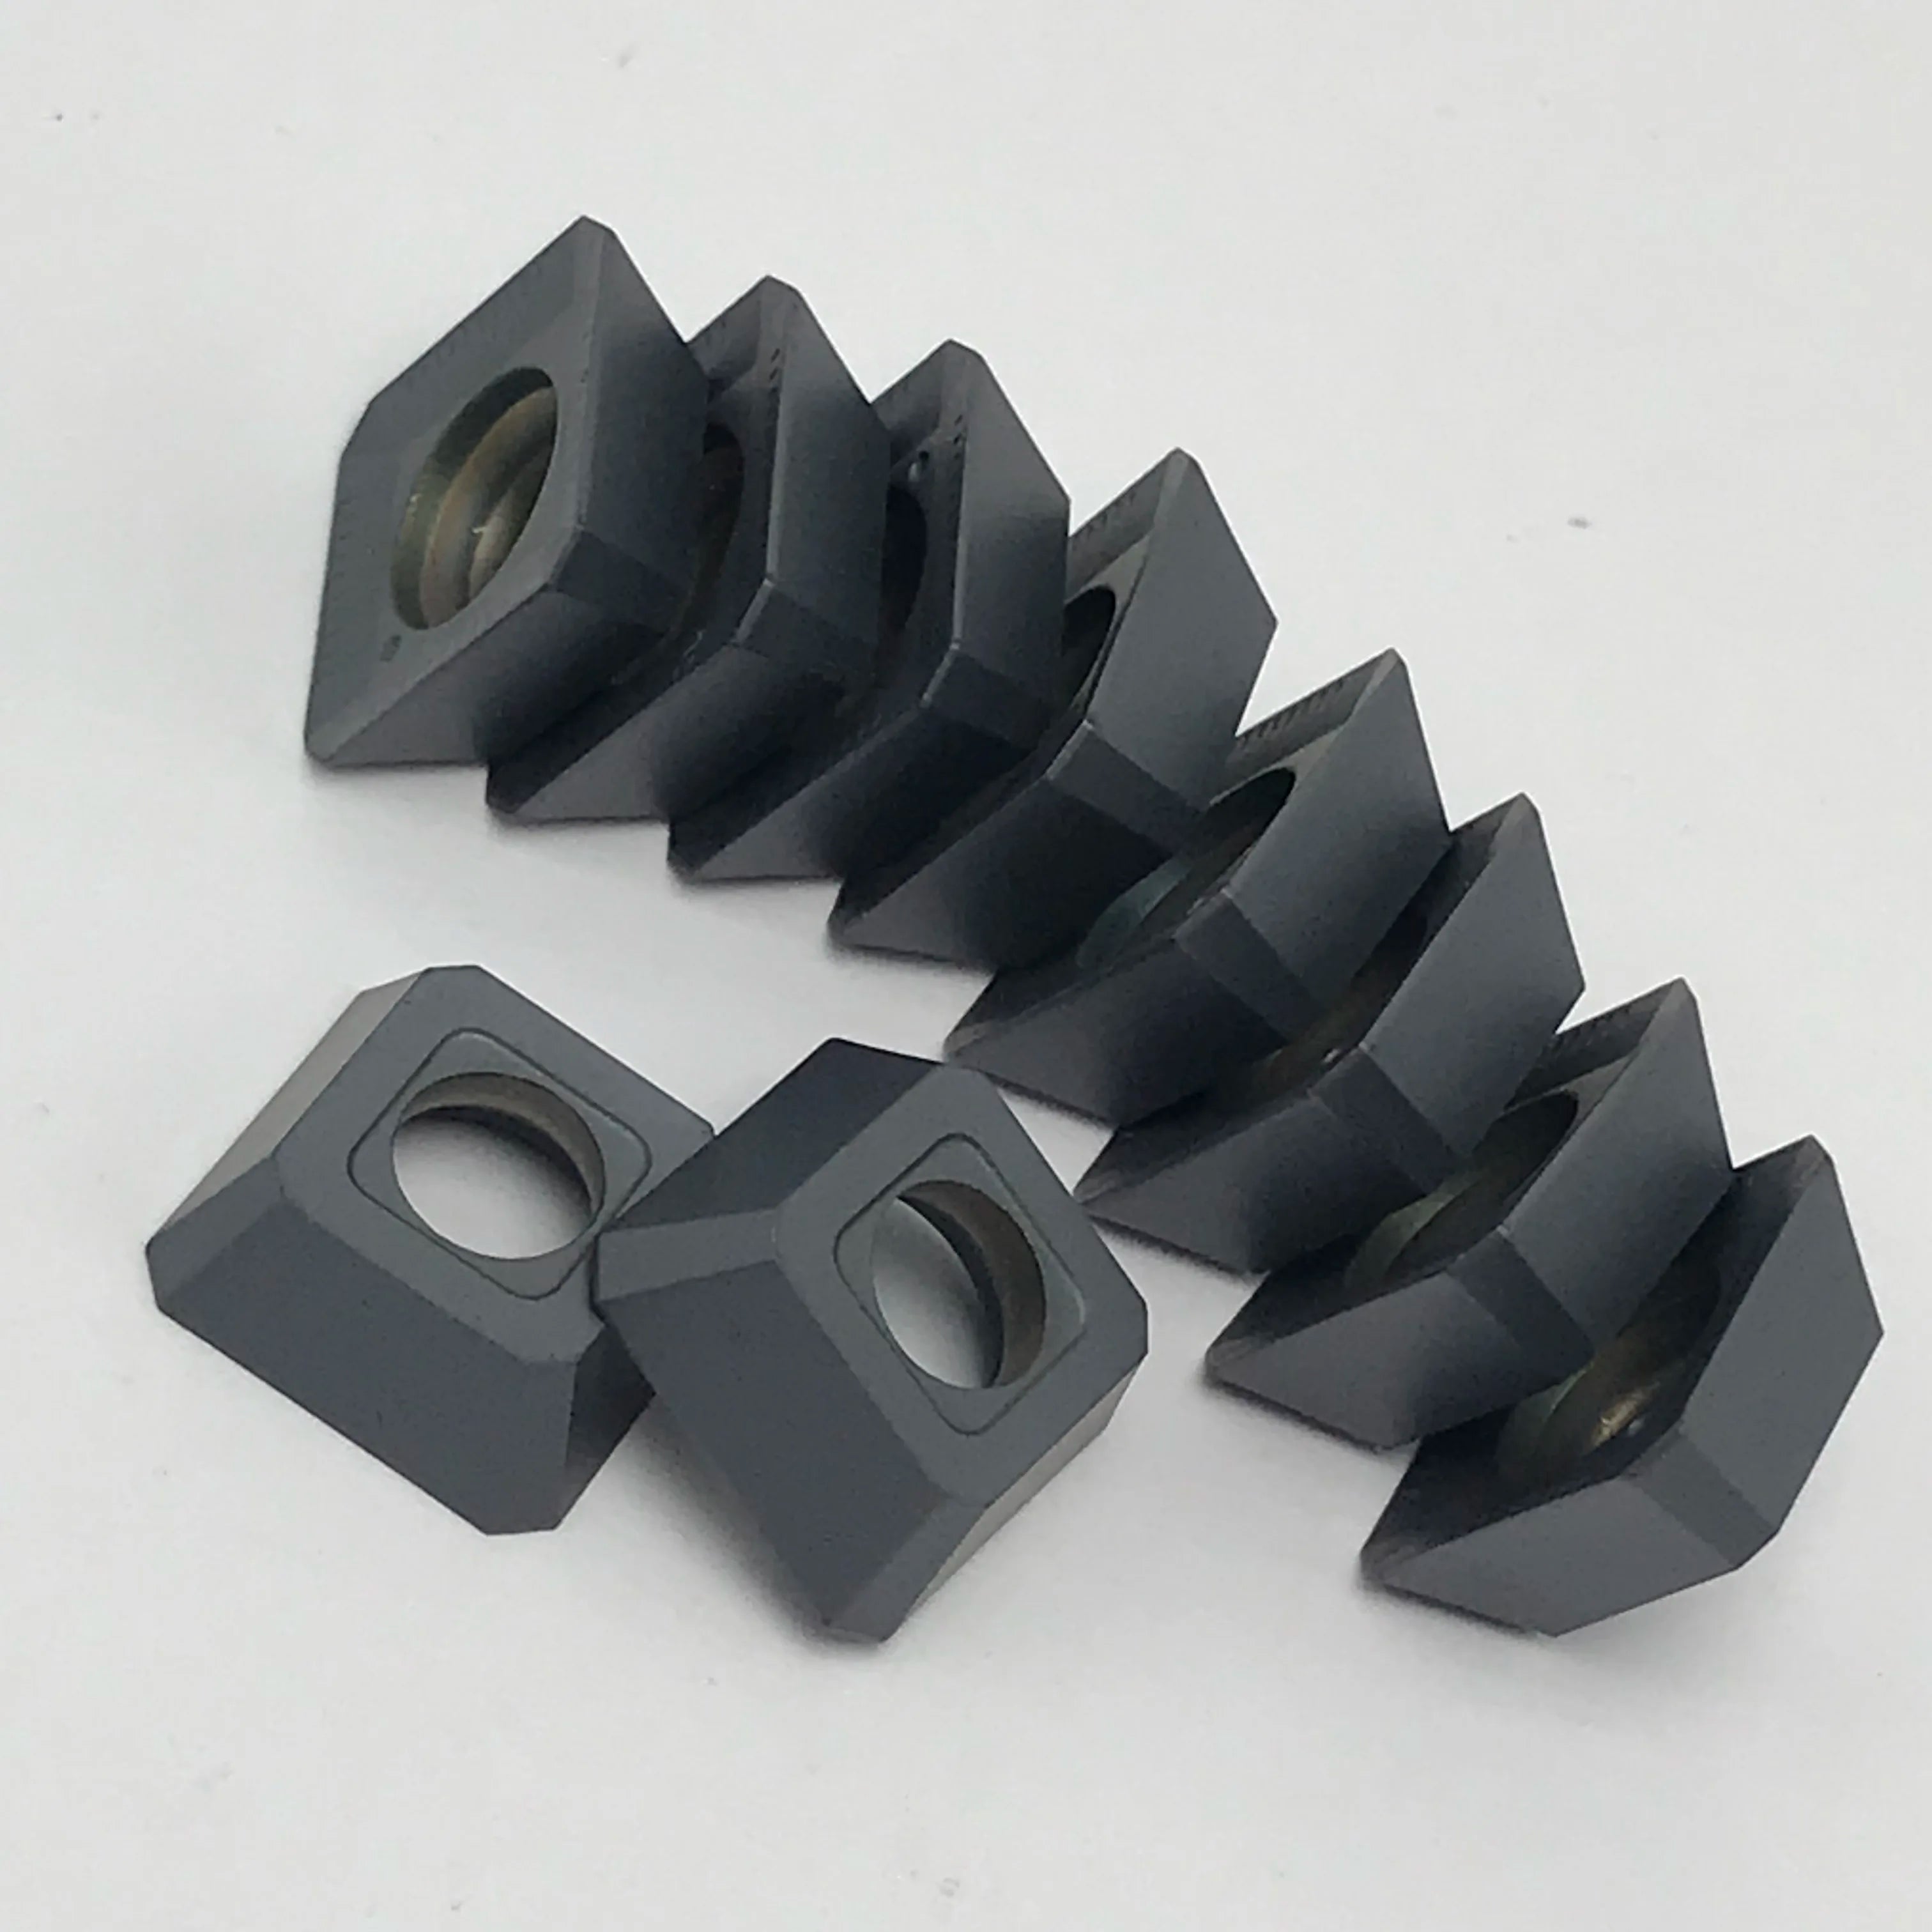 SEKT1204AFTN LT30 Indexable Milling Turning Tools Carbide Insert Lathe Tool High Quality Cutting Tool CNC Milling Insert